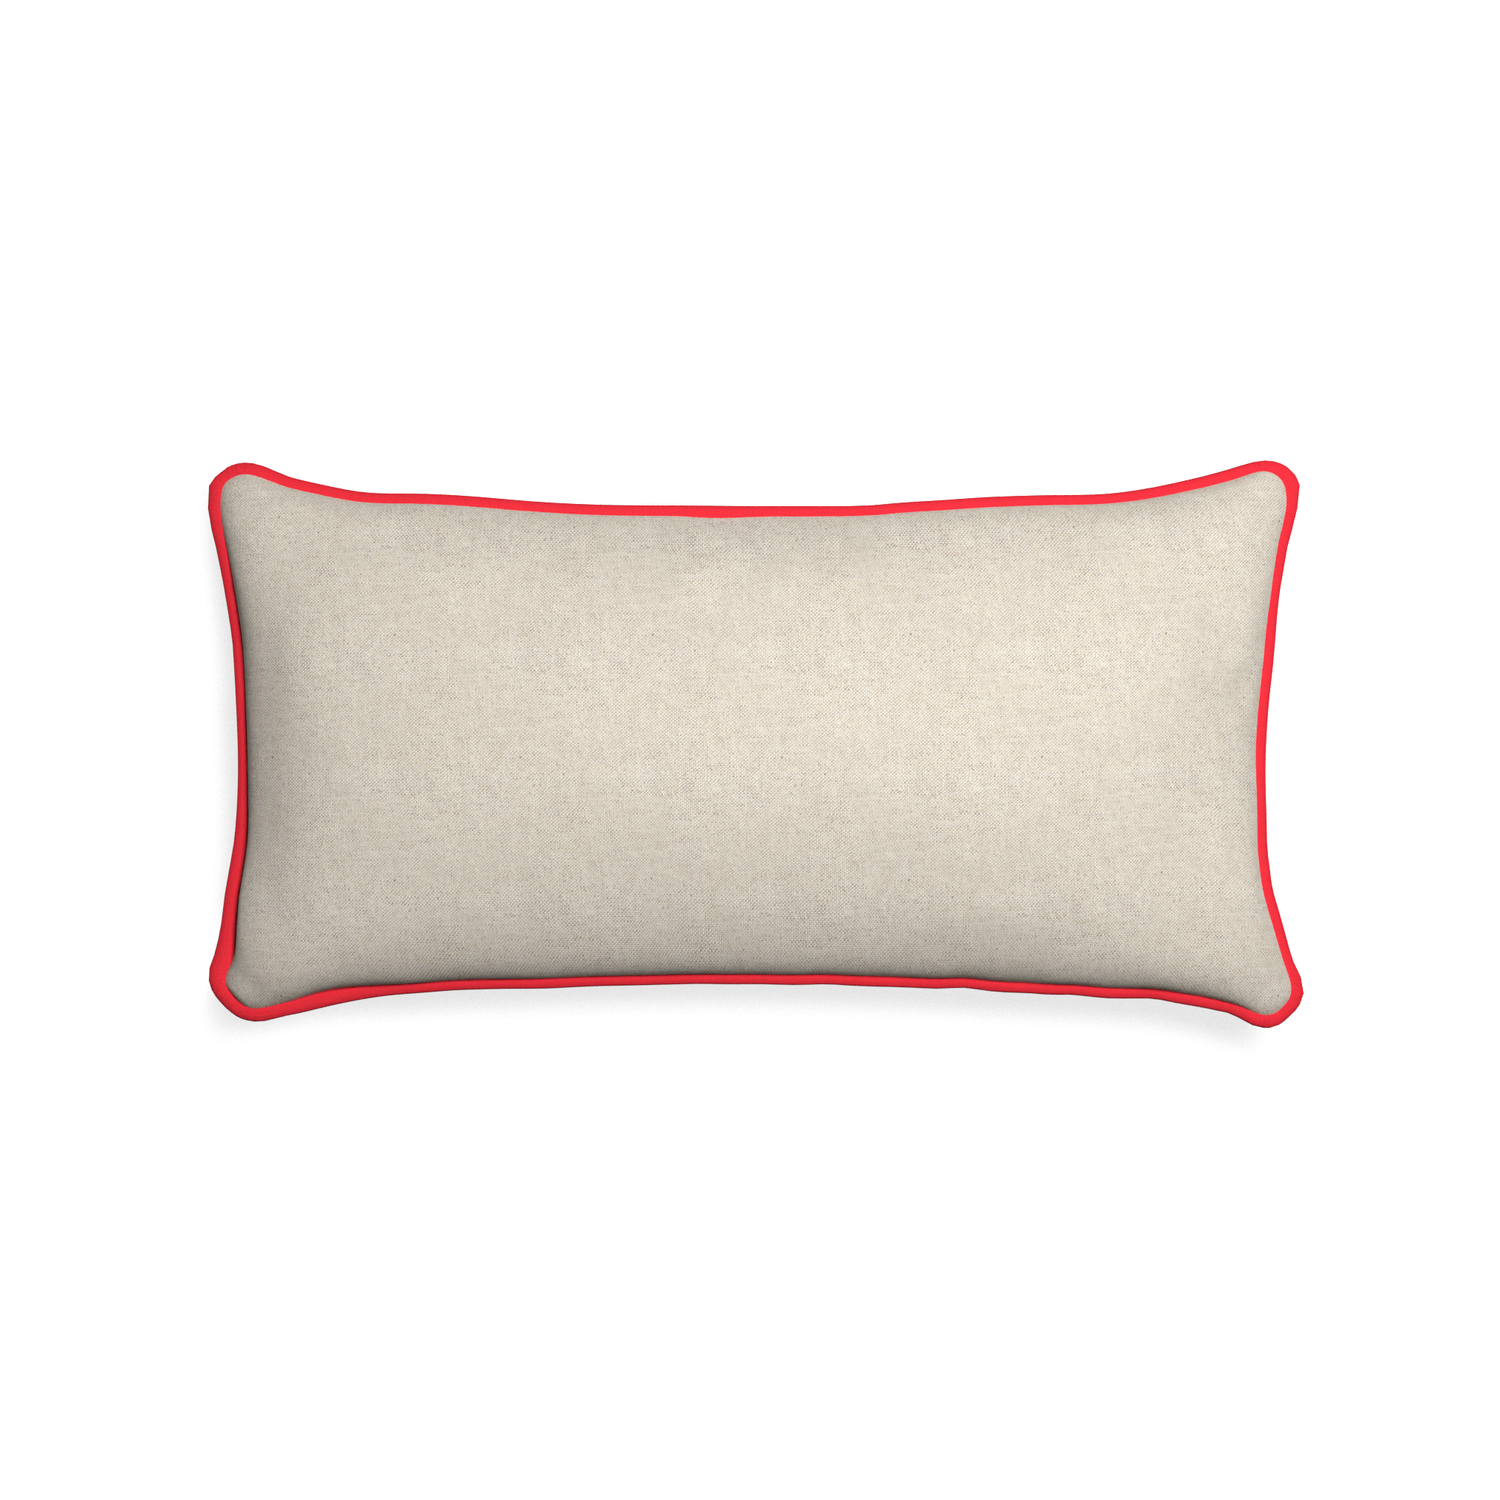 Midi-lumbar oat custom light brownpillow with cherry piping on white background